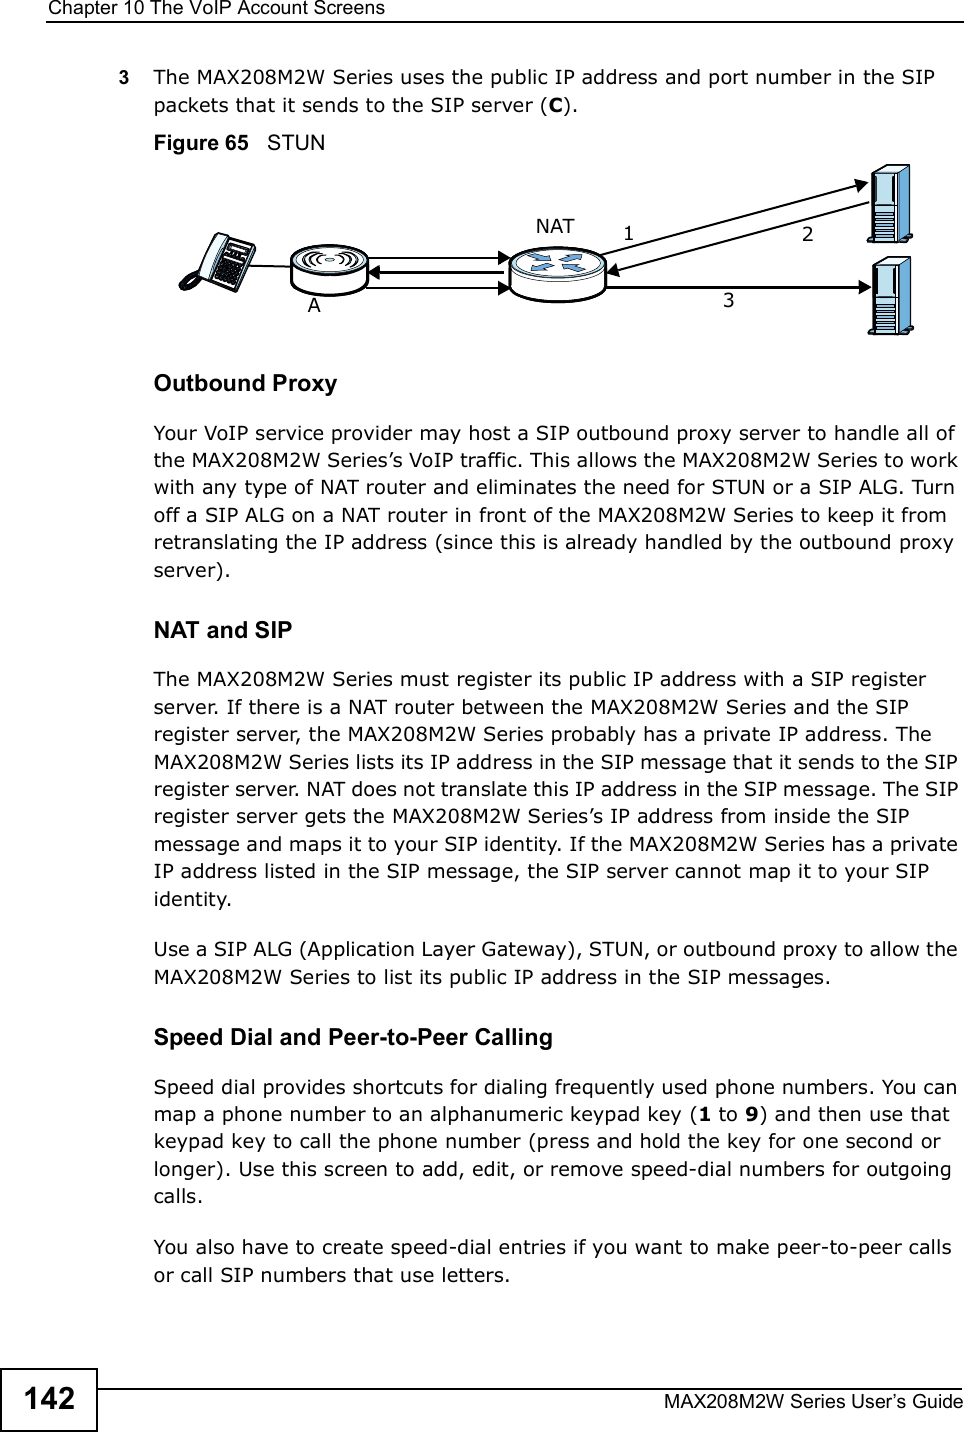 Chapter 10The VoIP Account ScreensMAX208M2W Series User s Guide1423The MAX208M2W Series uses the public IP address and port number in the SIP packets that it sends to the SIP server (C).Figure 65   STUNOutbound ProxyYour VoIP service provider may host a SIP outbound proxy server to handle all of the MAX208M2W Series s VoIP traffic. This allows the MAX208M2W Series to work with any type of NAT router and eliminates the need for STUN or a SIP ALG. Turn off a SIP ALG on a NAT router in front of the MAX208M2W Series to keep it from retranslating the IP address (since this is already handled by the outbound proxy server).NAT and SIPThe MAX208M2W Series must register its public IP address with a SIP register server. If there is a NAT router between the MAX208M2W Series and the SIP register server, the MAX208M2W Series probably has a private IP address. The MAX208M2W Series lists its IP address in the SIP message that it sends to the SIP register server. NAT does not translate this IP address in the SIP message. The SIP register server gets the MAX208M2W Series s IP address from inside the SIP message and maps it to your SIP identity. If the MAX208M2W Series has a private IP address listed in the SIP message, the SIP server cannot map it to your SIP identity.Use a SIP ALG (Application Layer Gateway), STUN, or outbound proxy to allow the MAX208M2W Series to list its public IP address in the SIP messages.Speed Dial and Peer-to-Peer CallingSpeed dial provides shortcuts for dialing frequently used phone numbers. You can map a phone number to an alphanumeric keypad key (1 to 9) and then use that keypad key to call the phone number (press and hold the key for one second or longer). Use this screen to add, edit, or remove speed-dial numbers for outgoing calls.You also have to create speed-dial entries if you want to make peer-to-peer calls or call SIP numbers that use letters.A123NAT